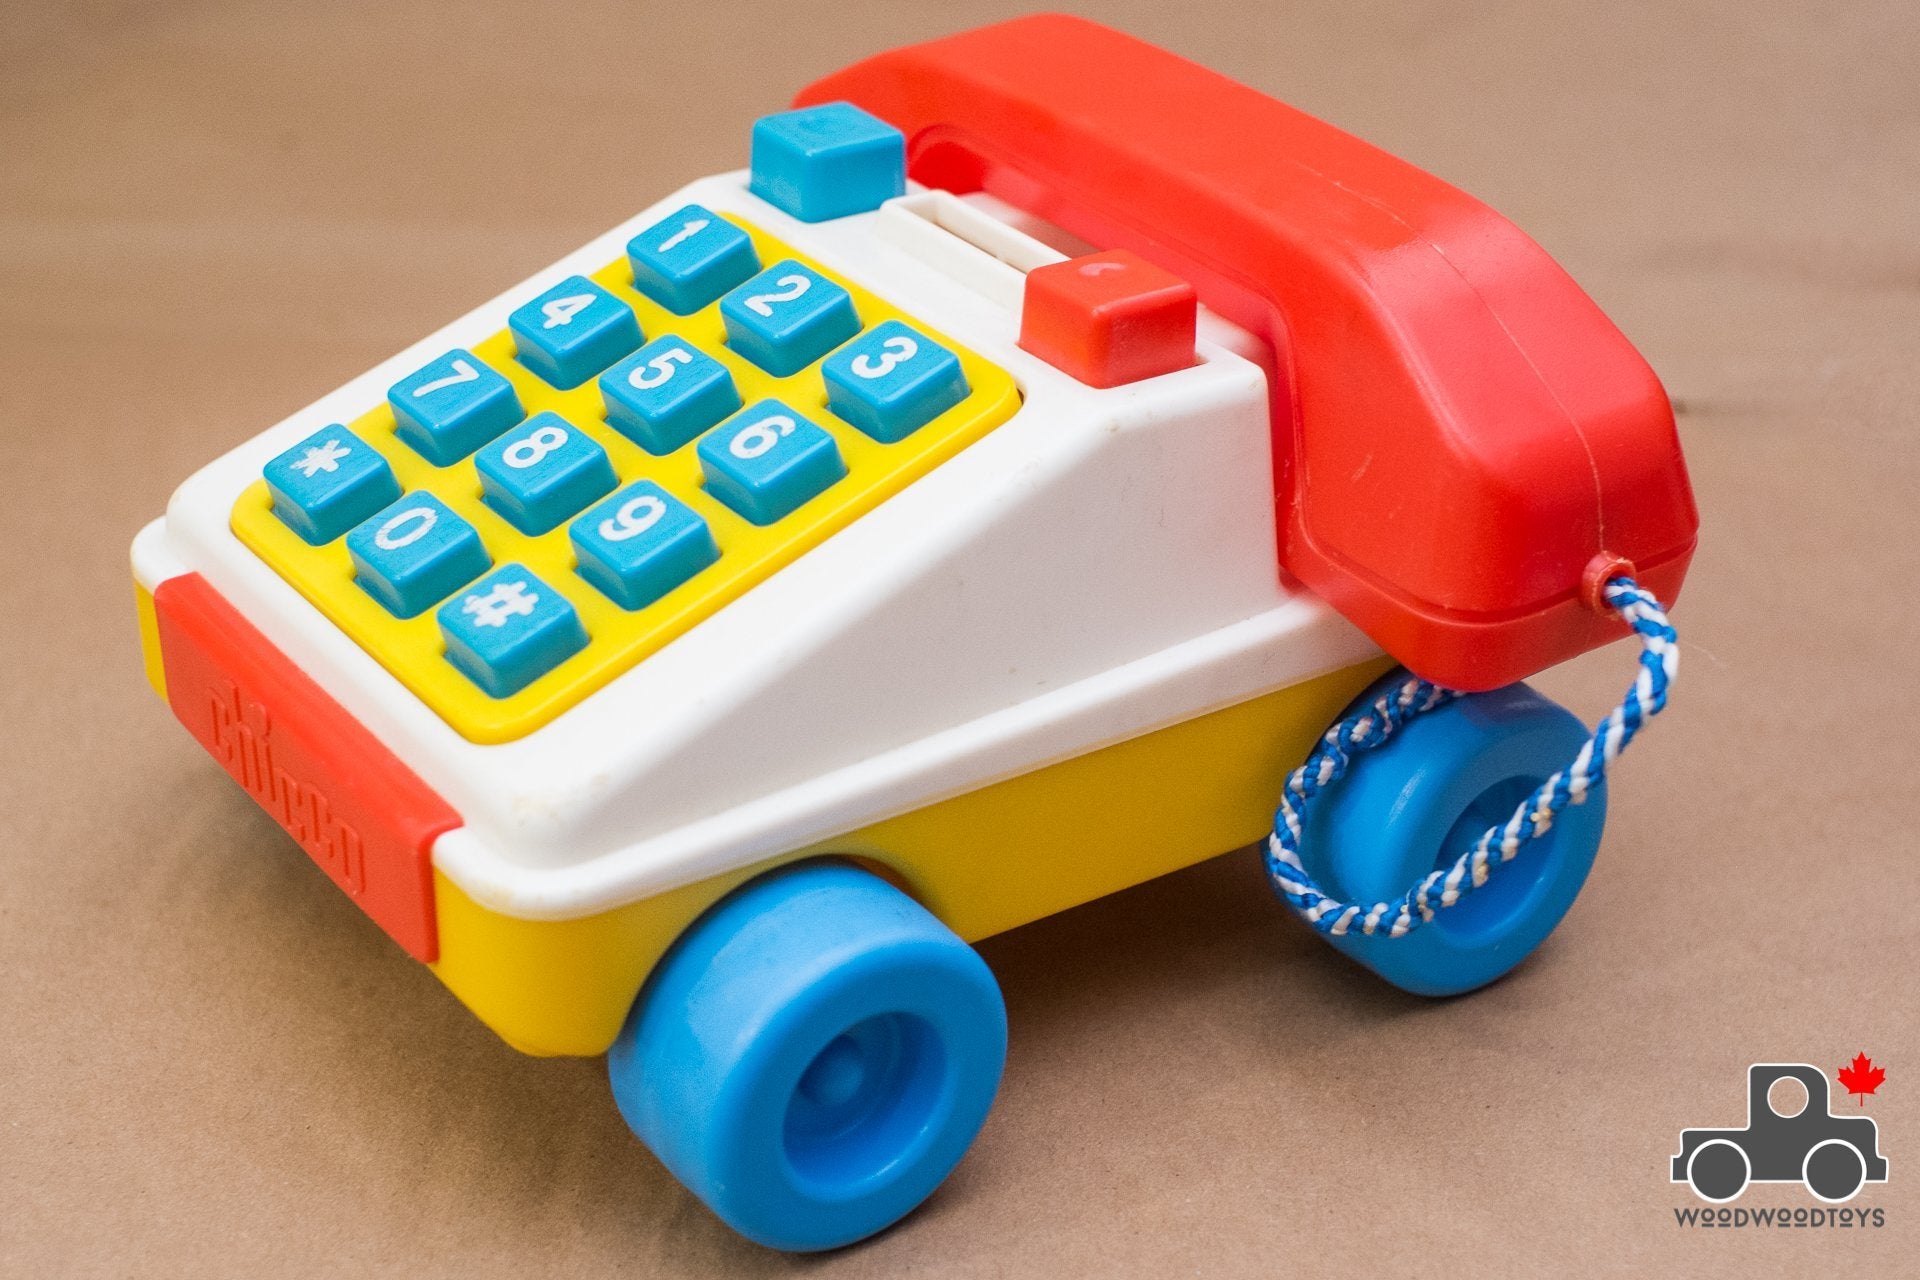 Vintage 1970s Chicco Toy Telephone - Made in Italy - Wood Wood Toys Canada's Favourite Montessori Toy Store